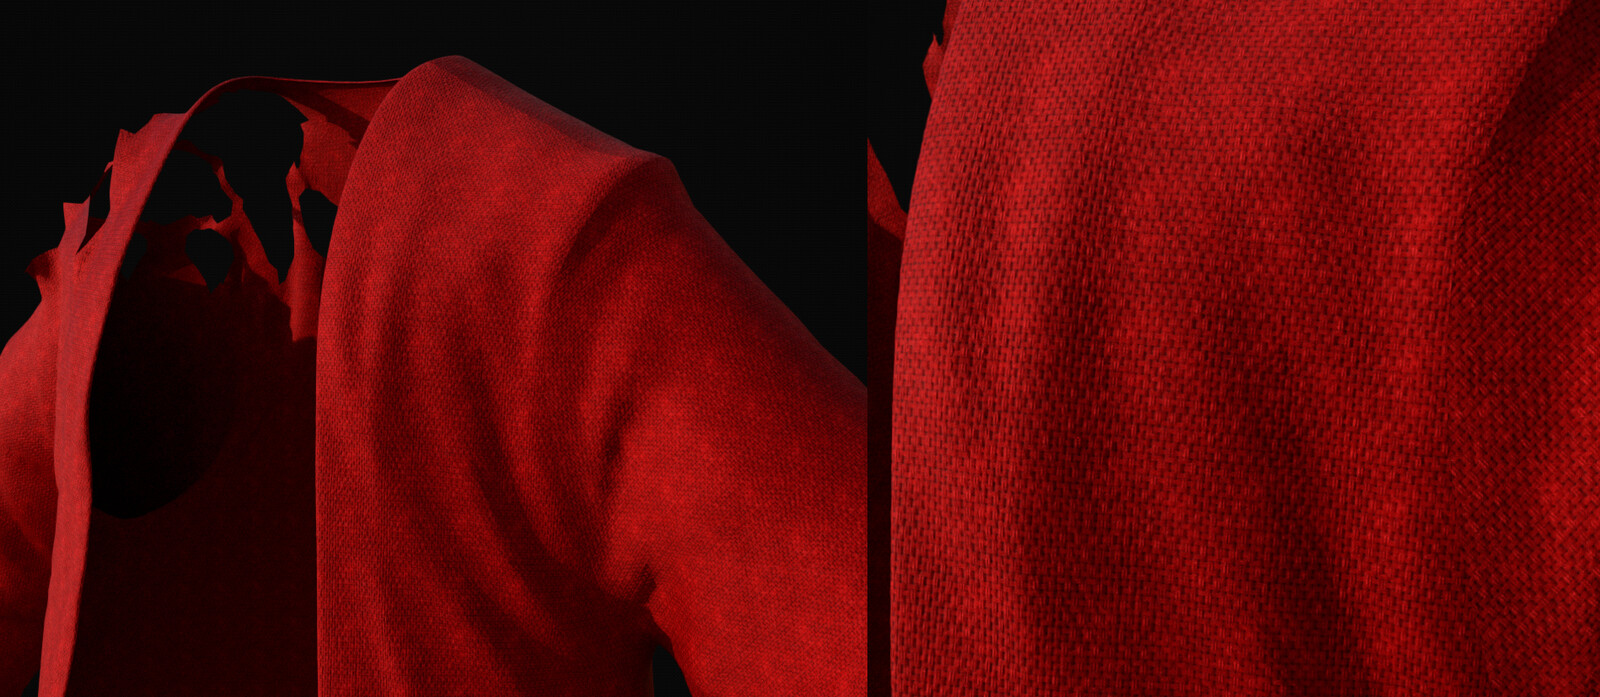 Substance Design + Painter for the Cloth/patterns.